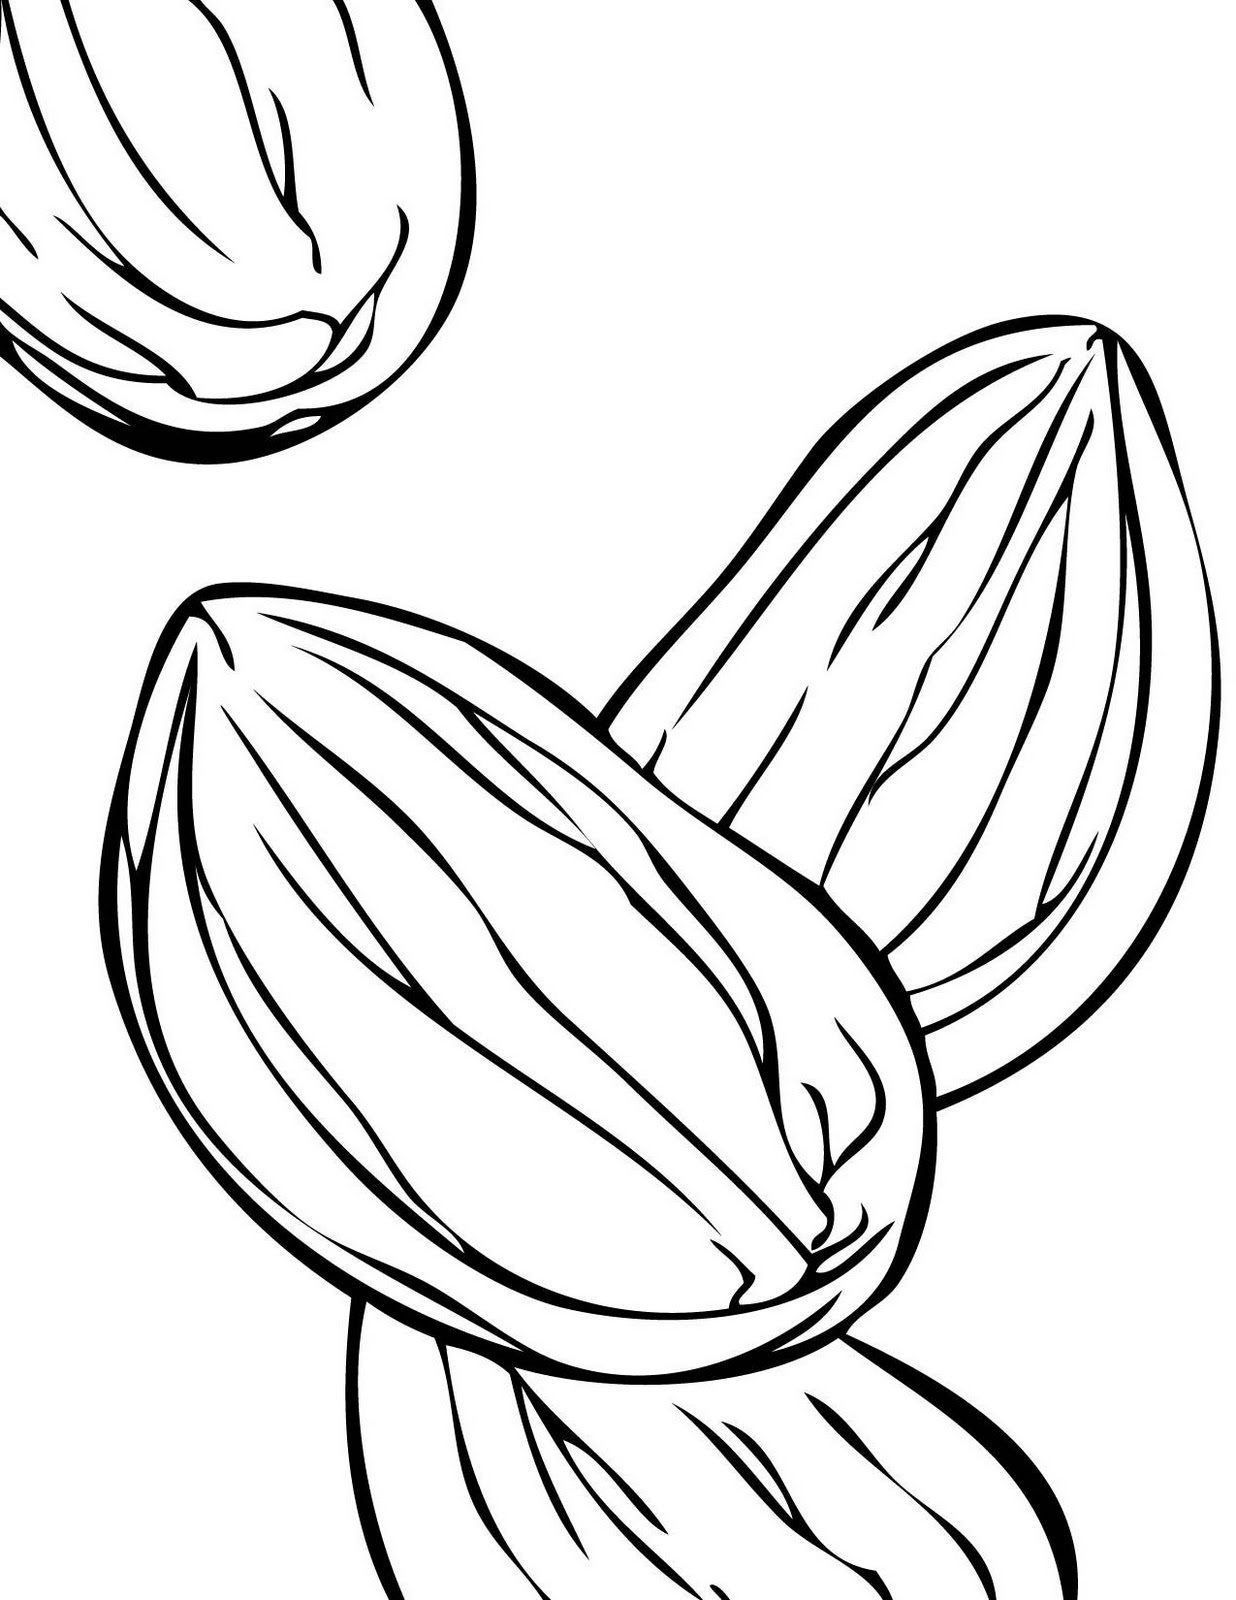 almonds coloring page